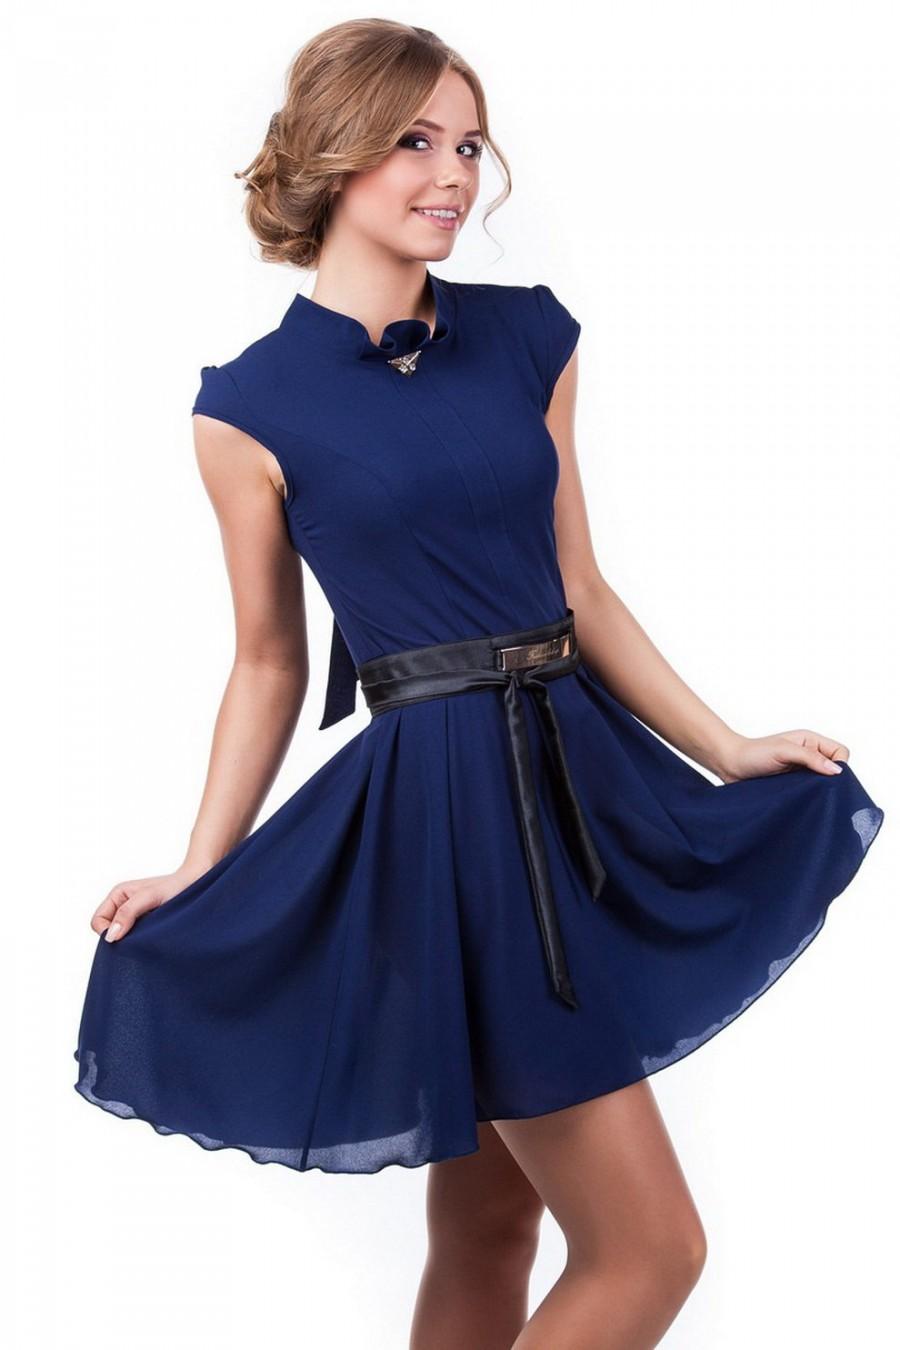 Hochzeit - Cocktail dress Navy blue Formal chiffon dress. Dress knee length bridesmaid. Prom flared dress with lace and bow on the back. Evening dress.